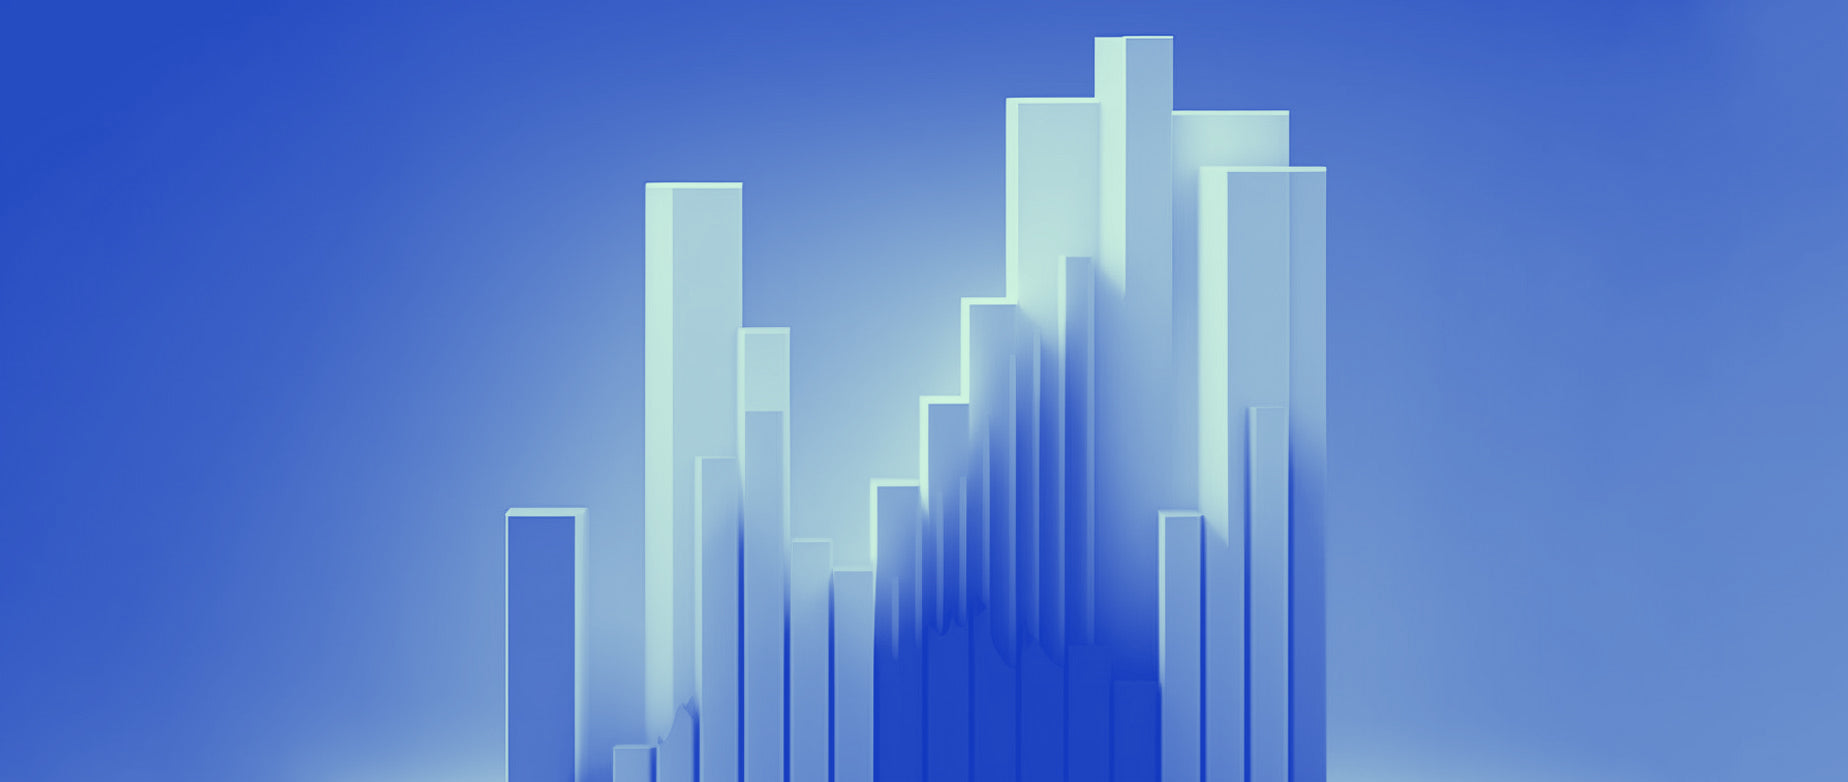 image of bars from a bar chart, with some of them tall and others lower in height: business strategy